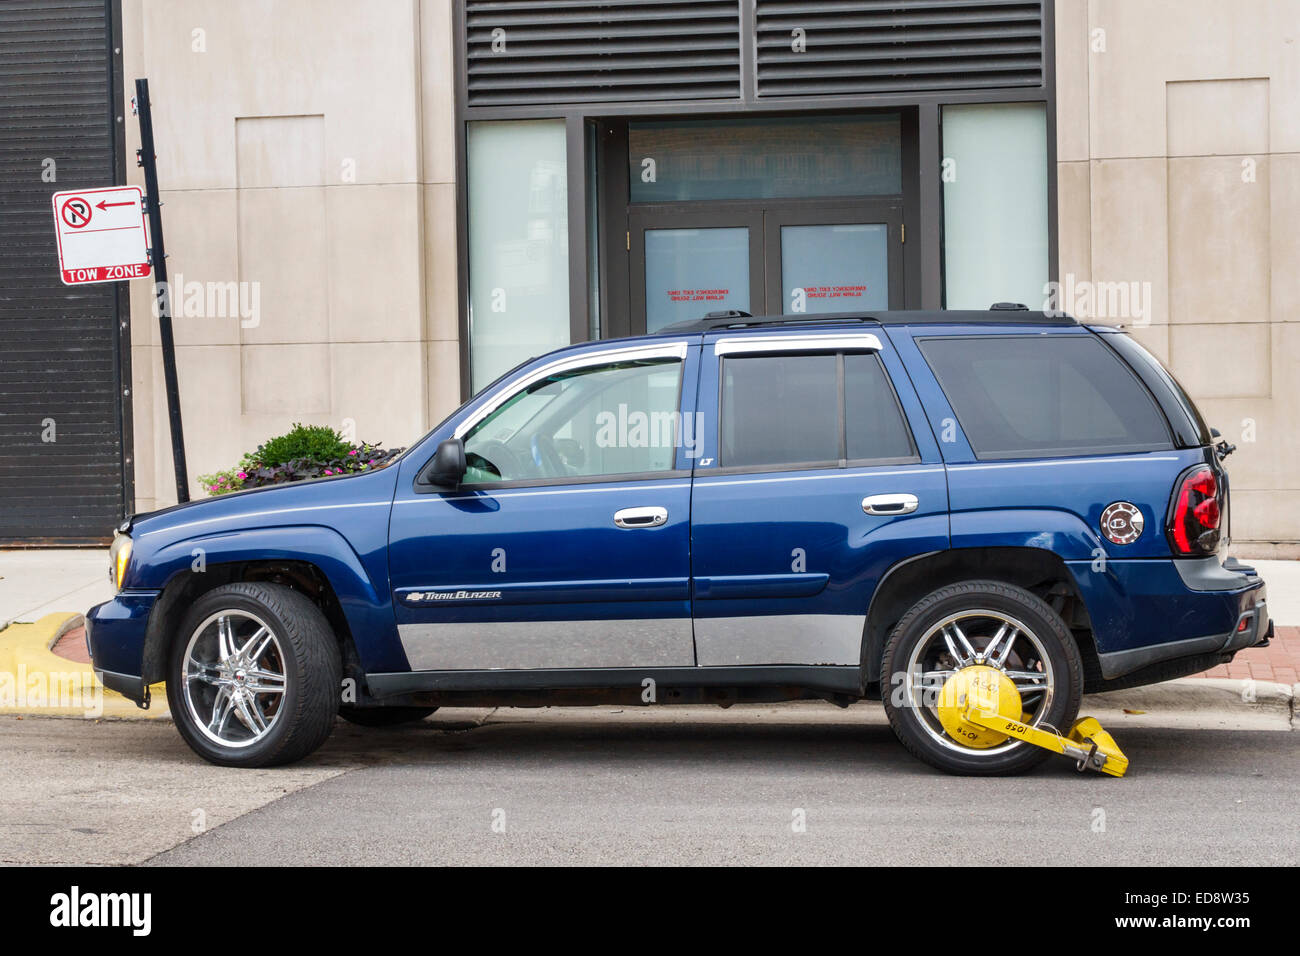 Chicago Illinois,Gold Coast Historic District,neighborhood,SUV,vehicle,Trail Blazer,blue,parked,illegal parking,sign,wheel clamp,boot,enforcement,IL14 Stock Photo